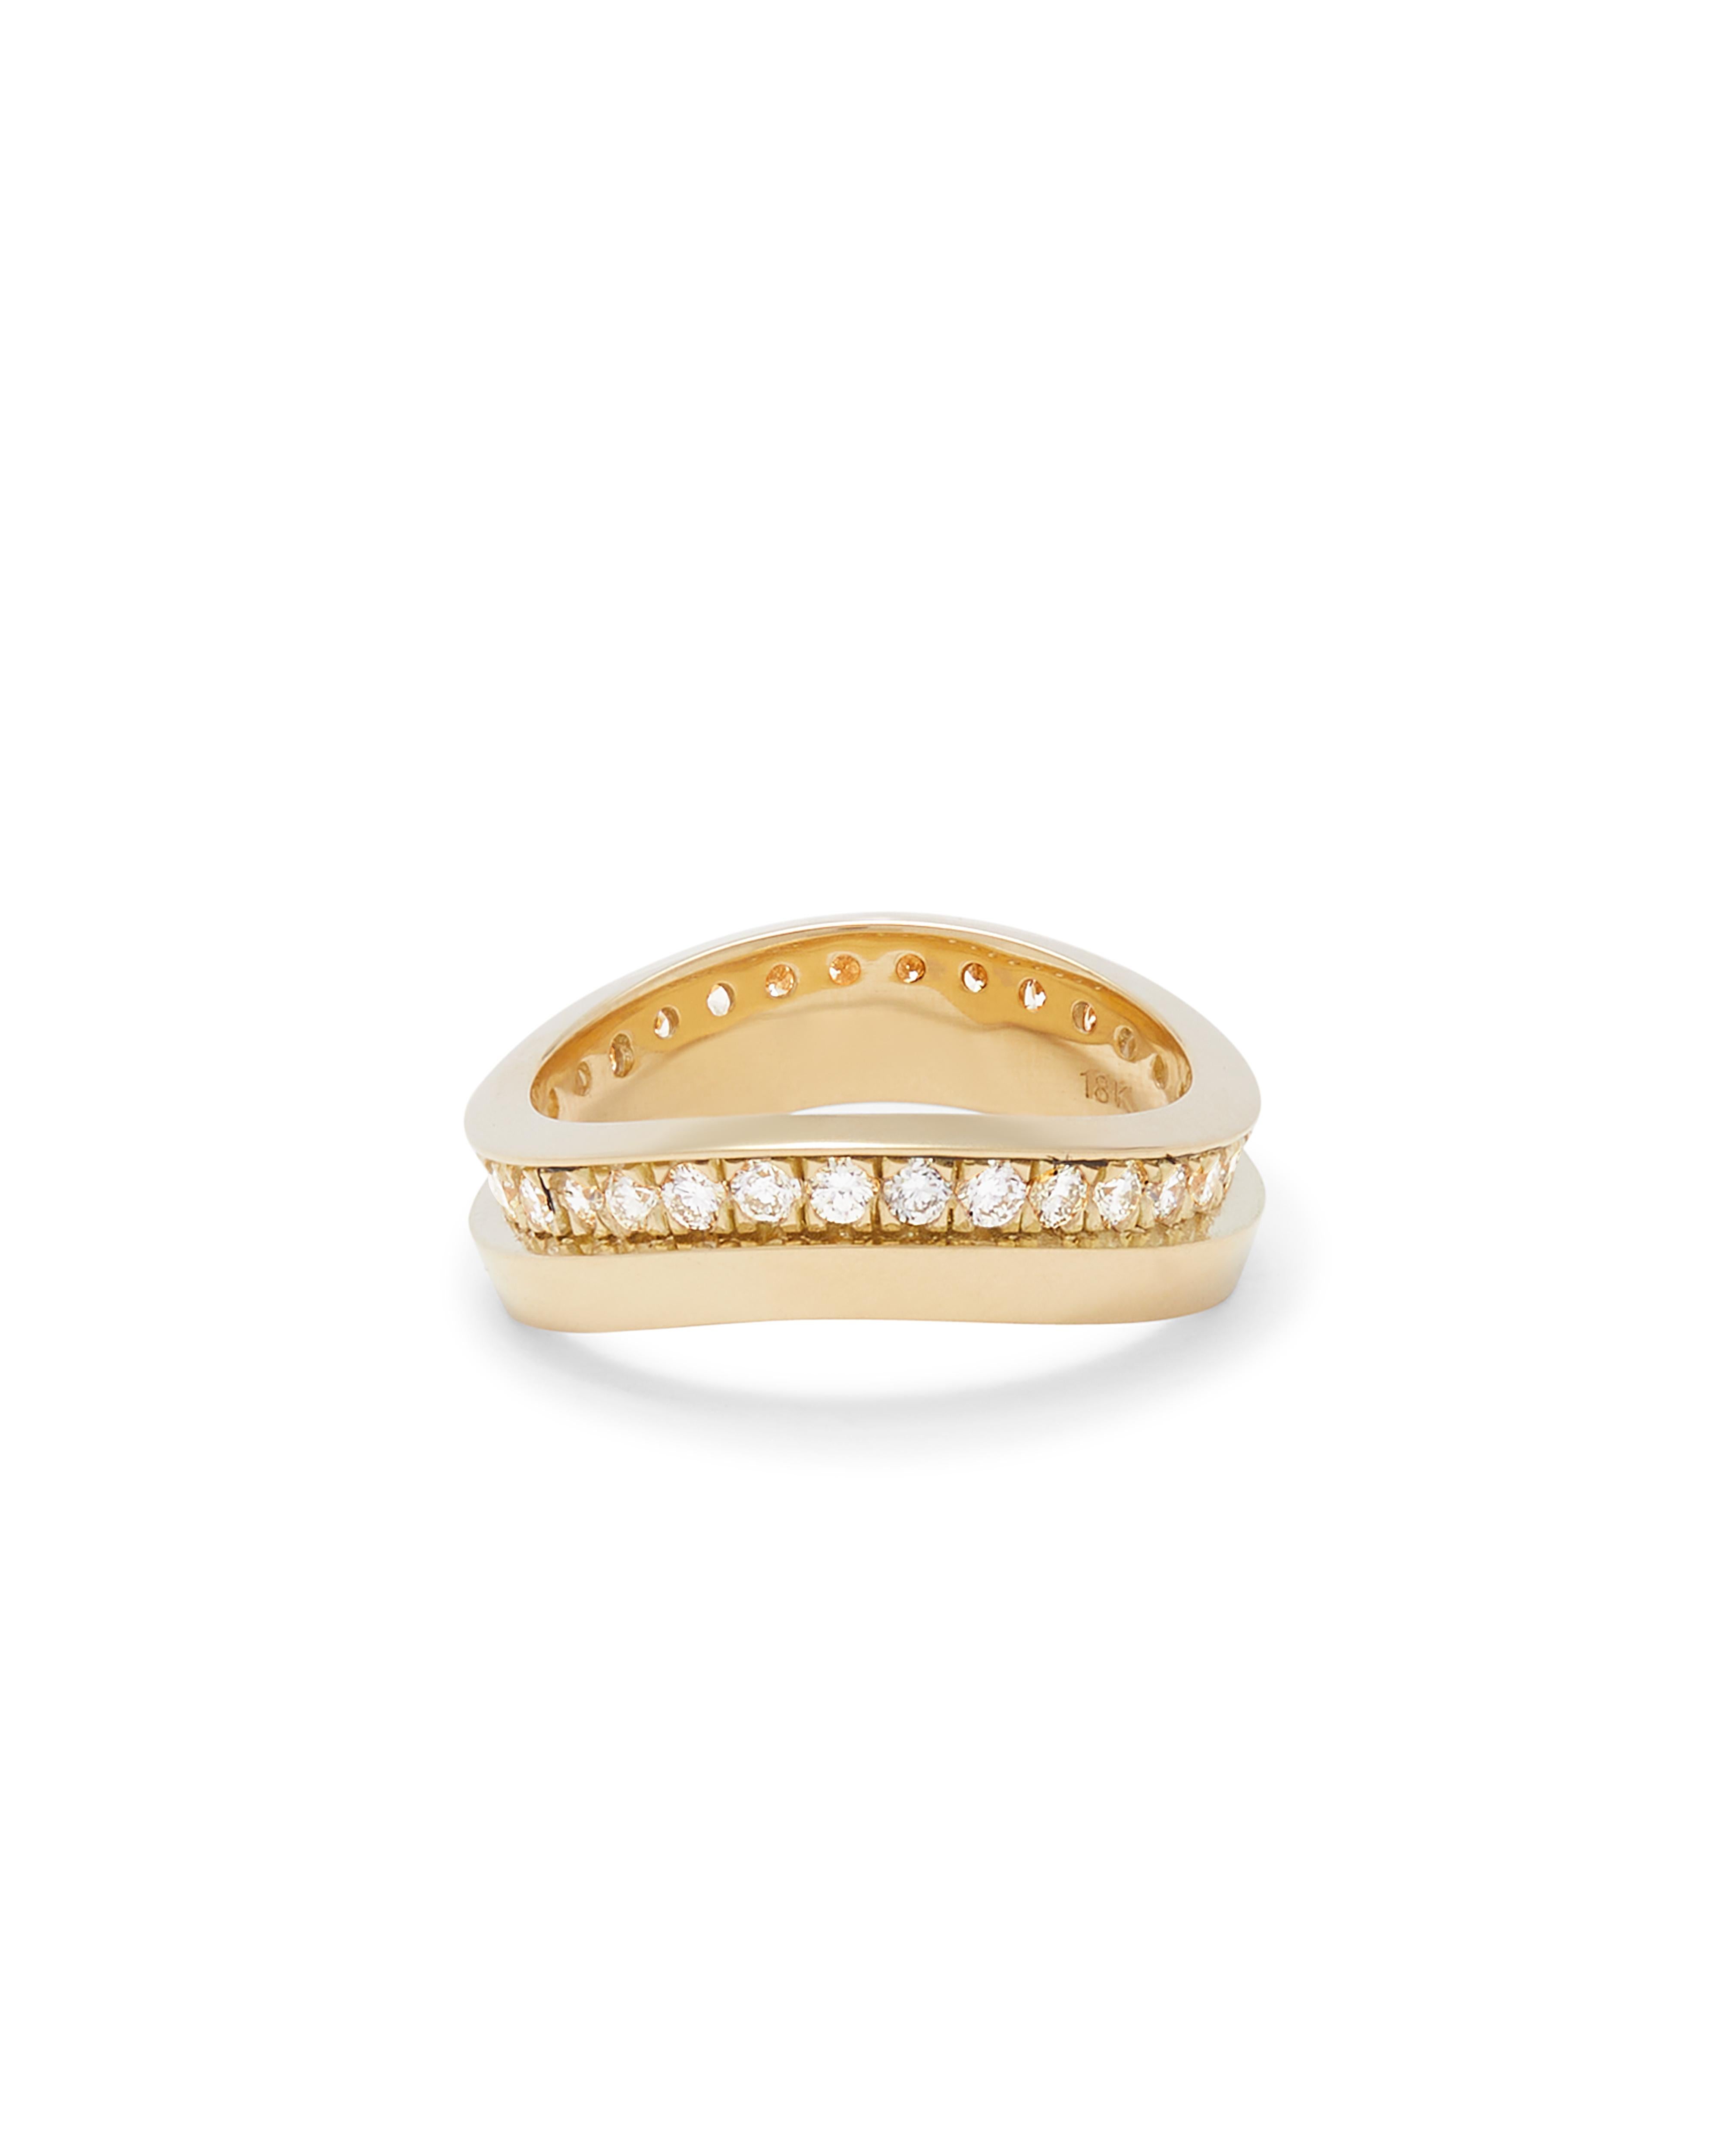 Elevate your jewelry game with this stunning 18K yellow gold ring. It's curved are perfectly designed to stack with itself or with our Strata ring. Handcrafted in NYC, this ring features a modern tiered detail set with brilliant cut diamonds all the